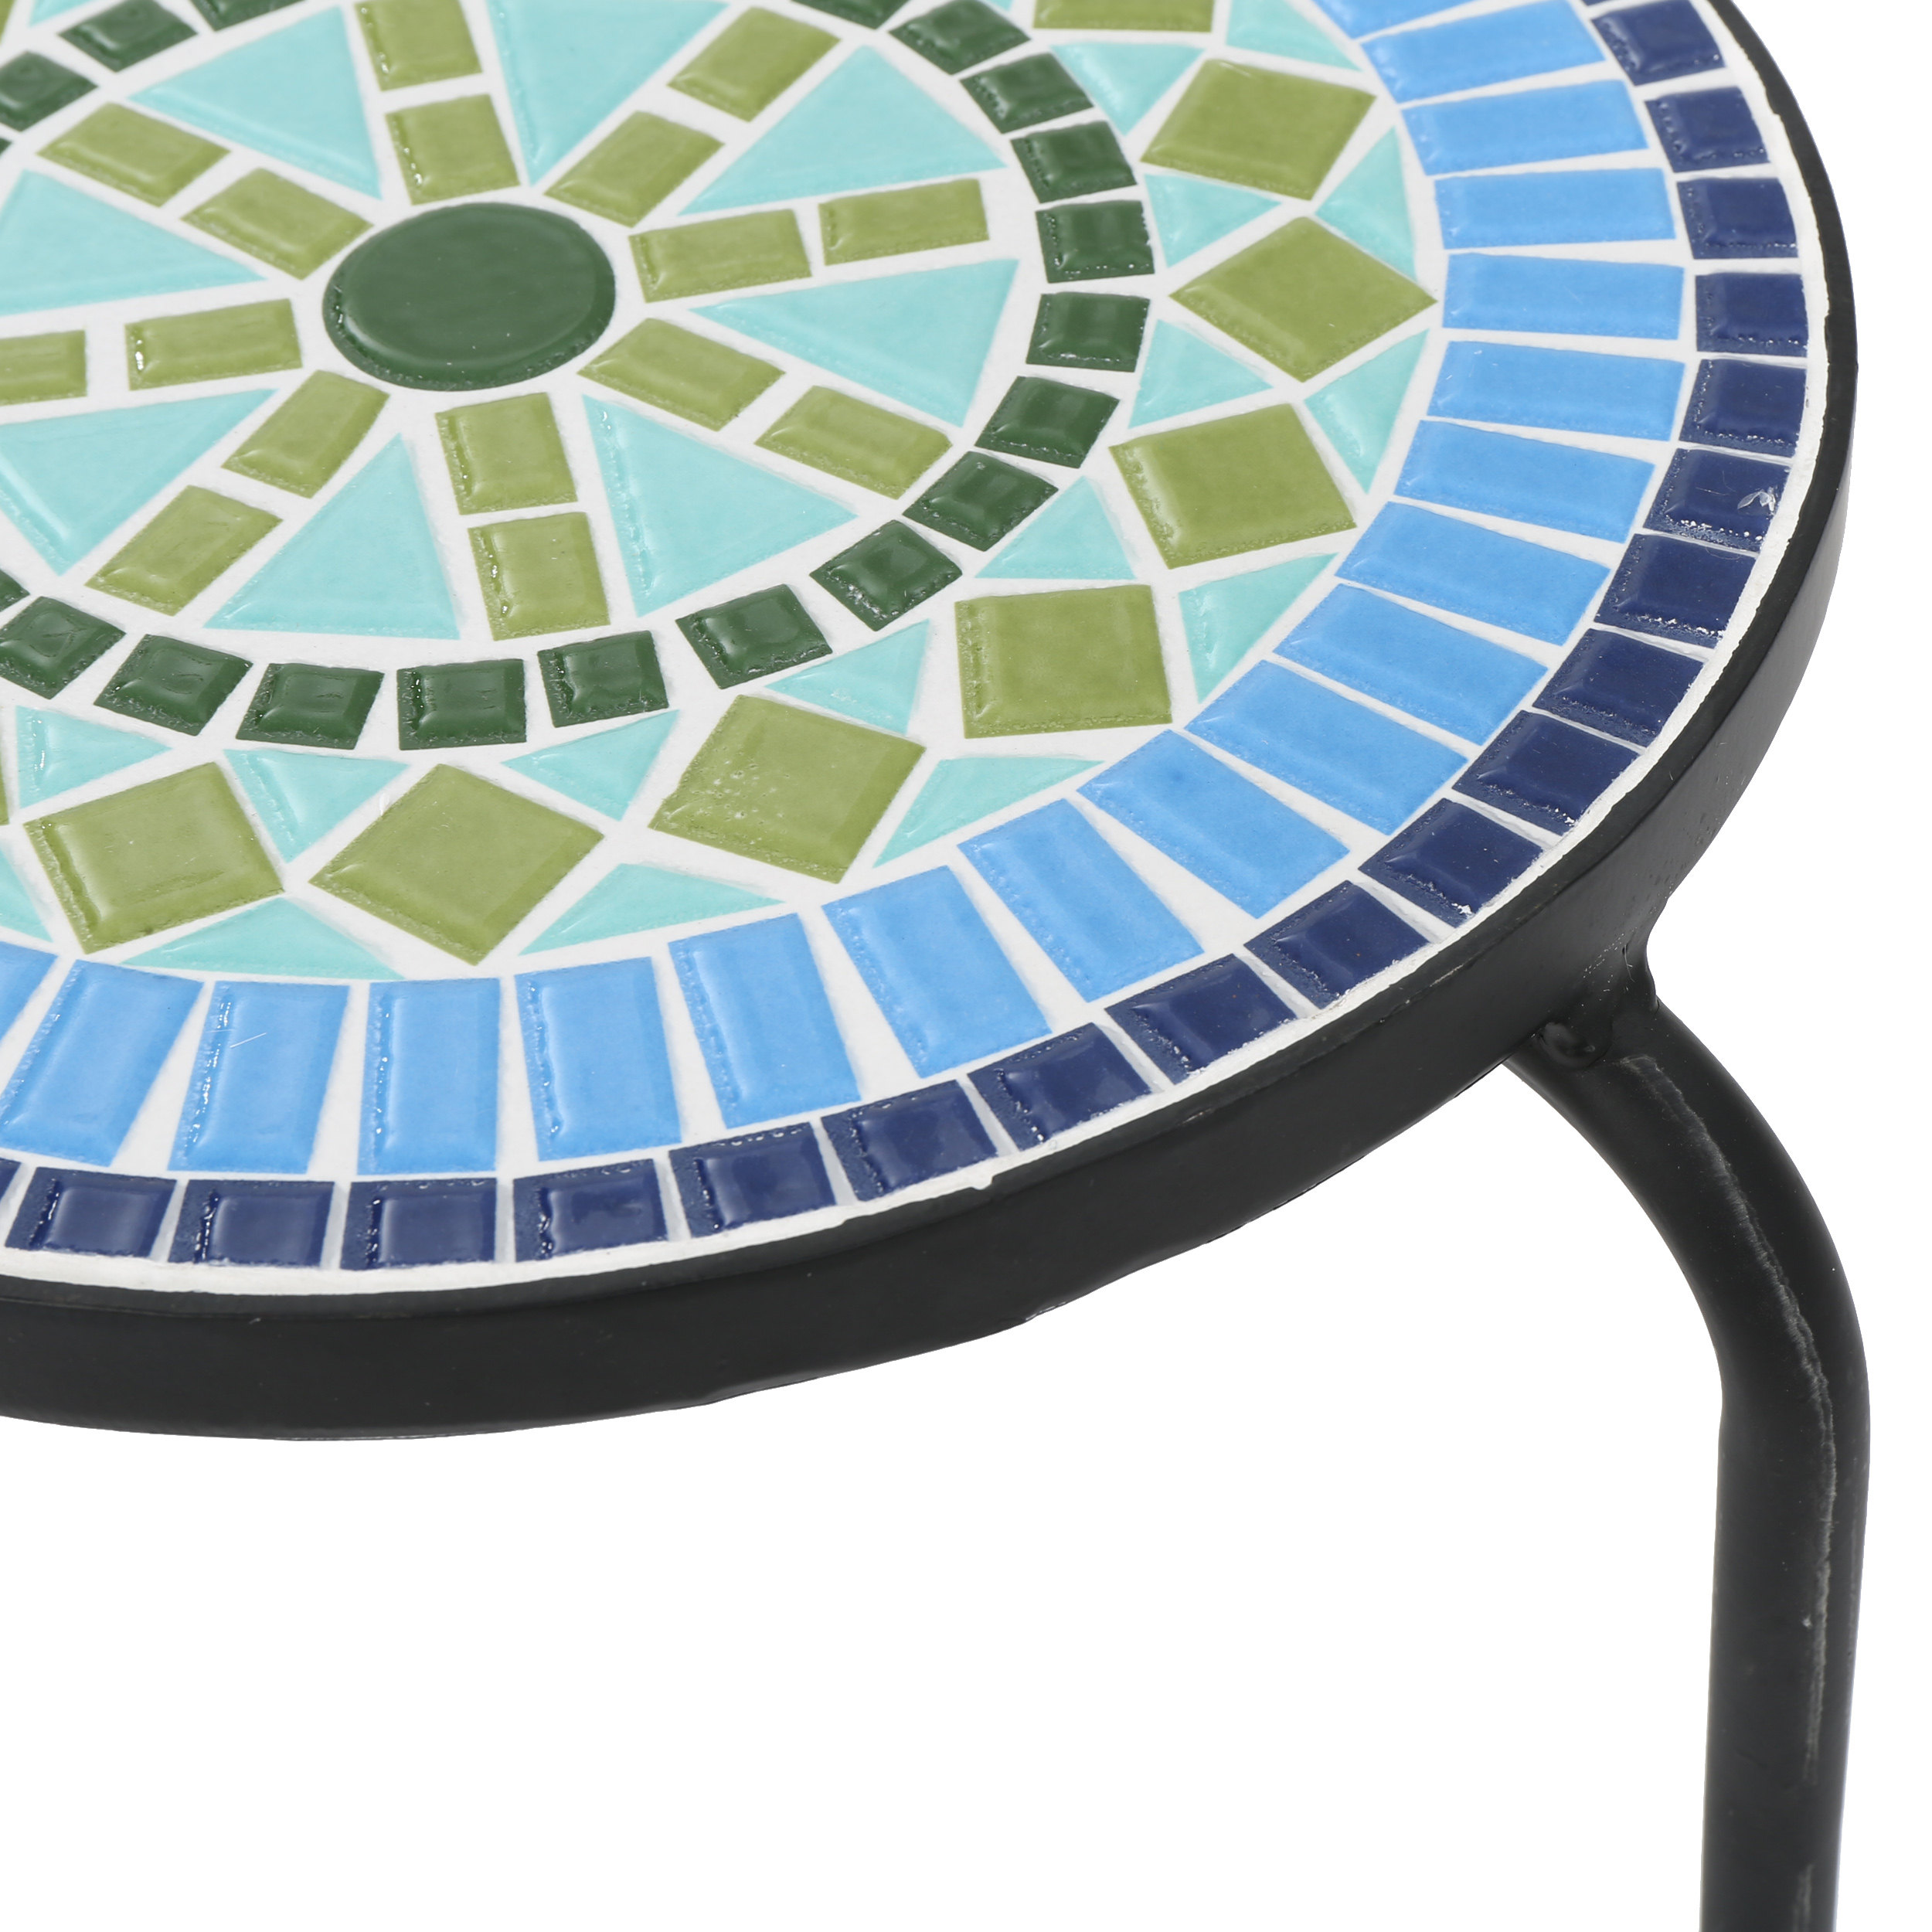 Noble House Martina Outdoor Ceramic Tile Side Table with Iron Frame, Blue and Green - image 4 of 7